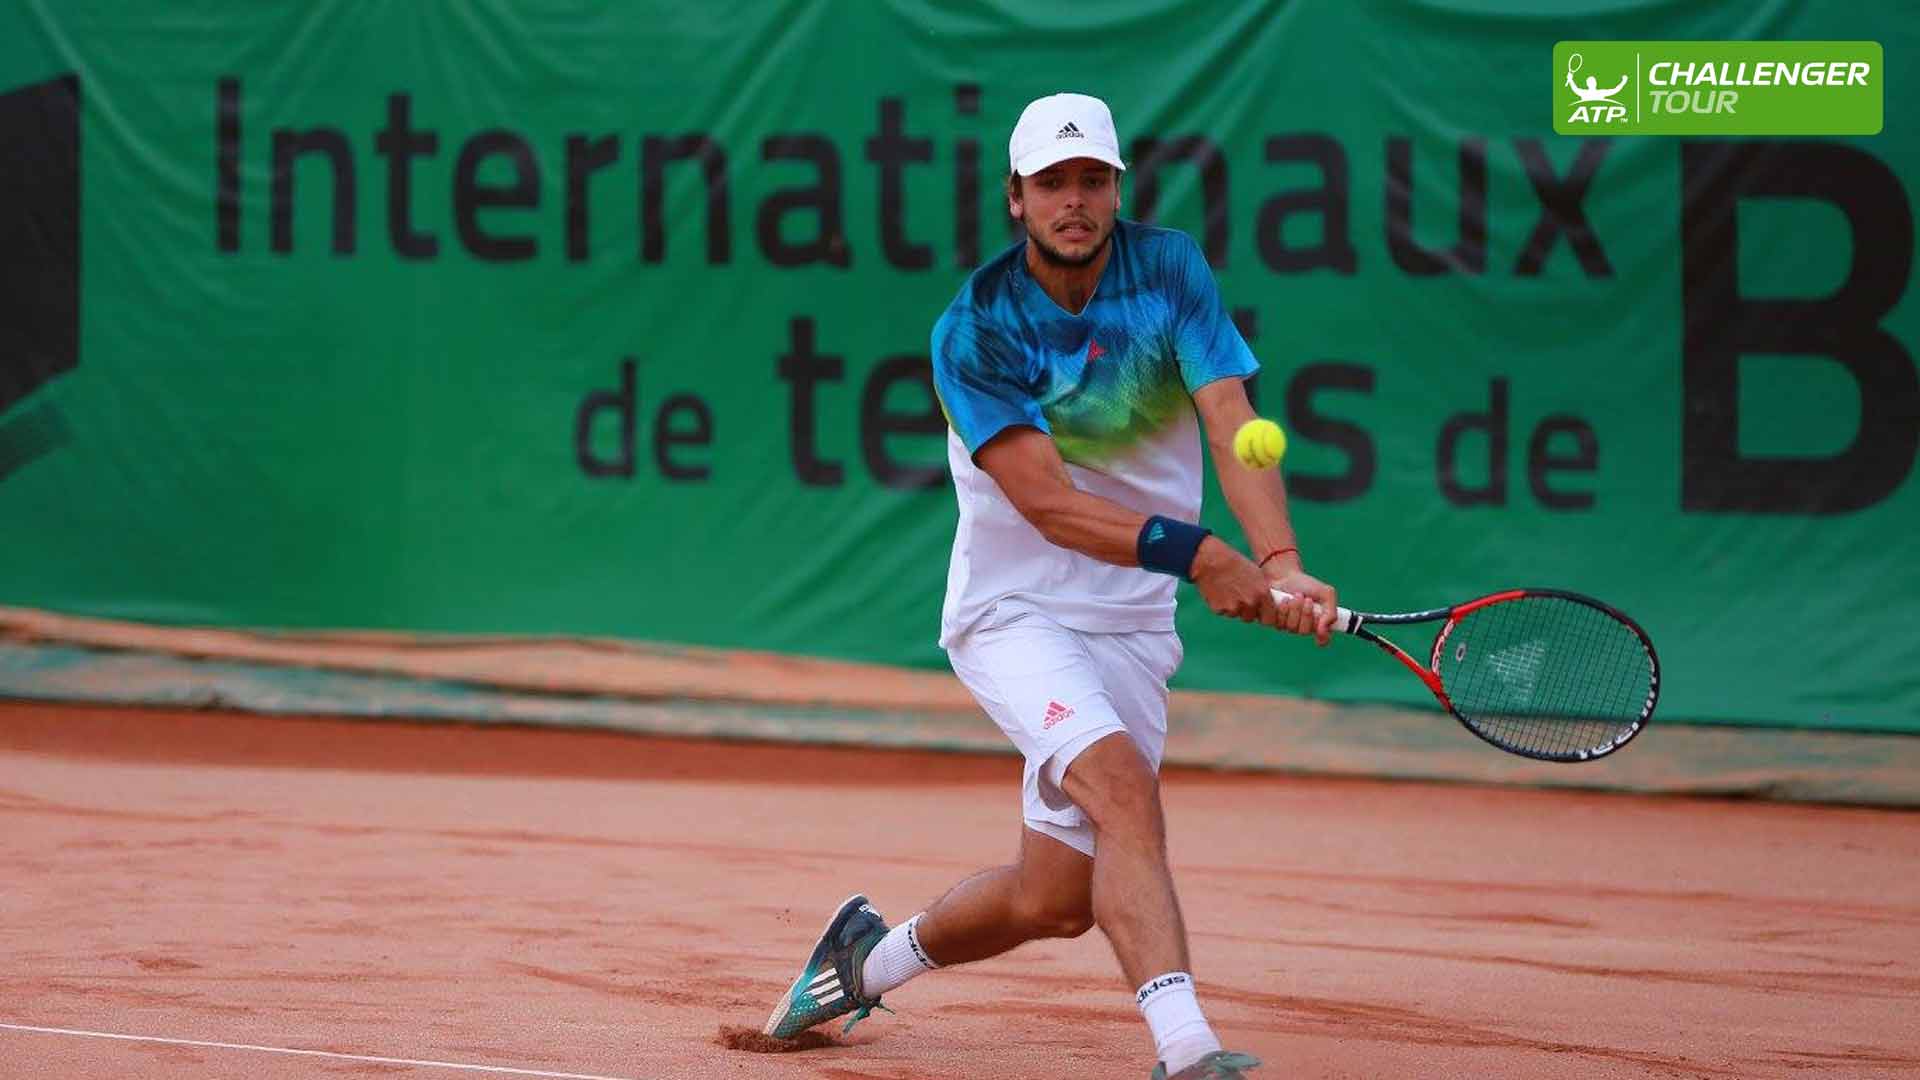 Gregoire Barrere competes this week at the ATP Challenger Tour event in Blois. 